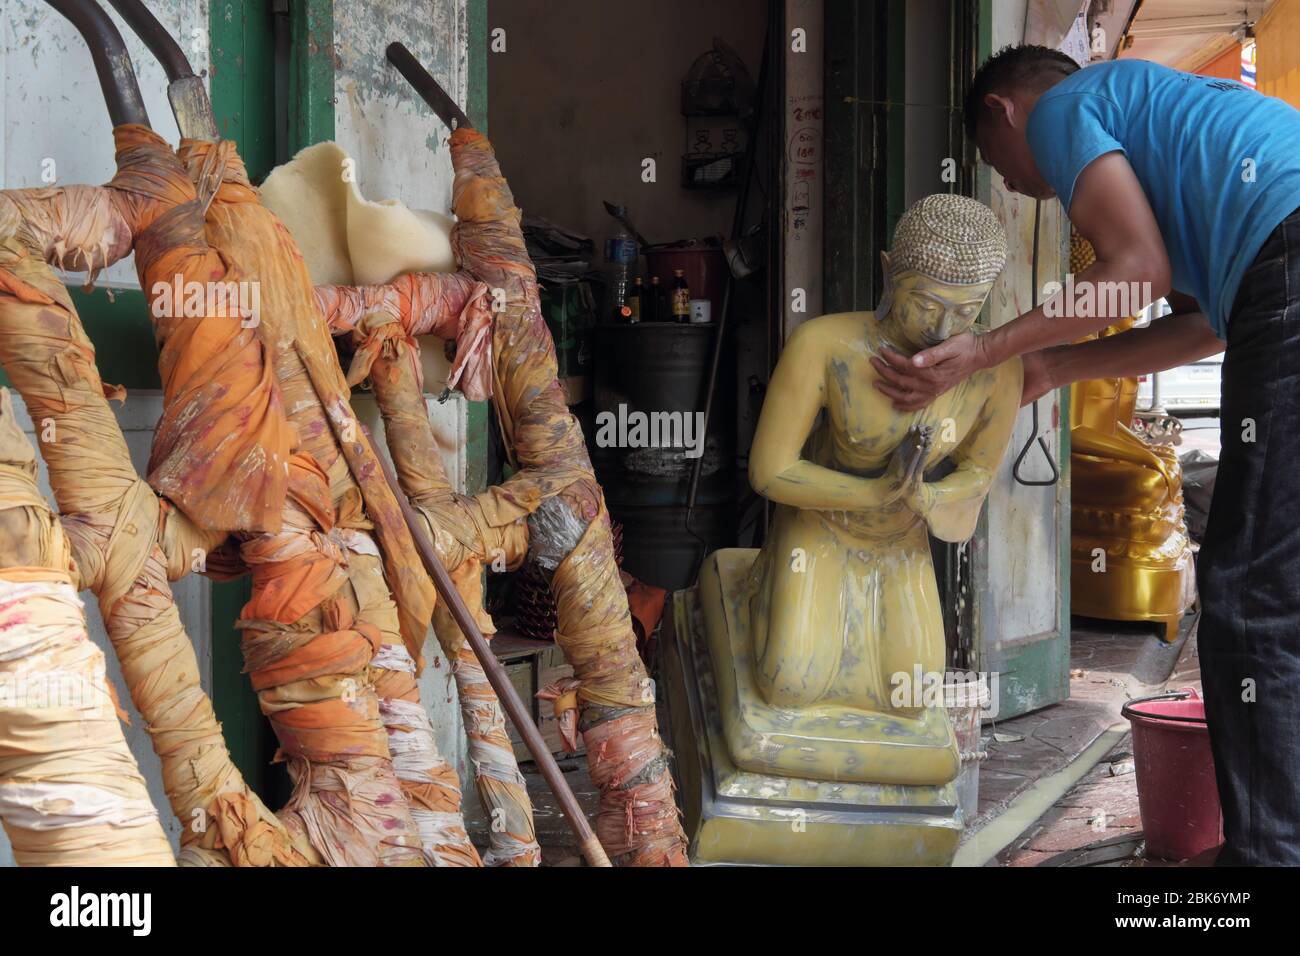 At a factory for Buddha statues in Bamrung Muang Road, Sao-Ching-Chaa, Bangkok, Thailand, an employee carefully moves a yet unfinished Buddha statue Stock Photo